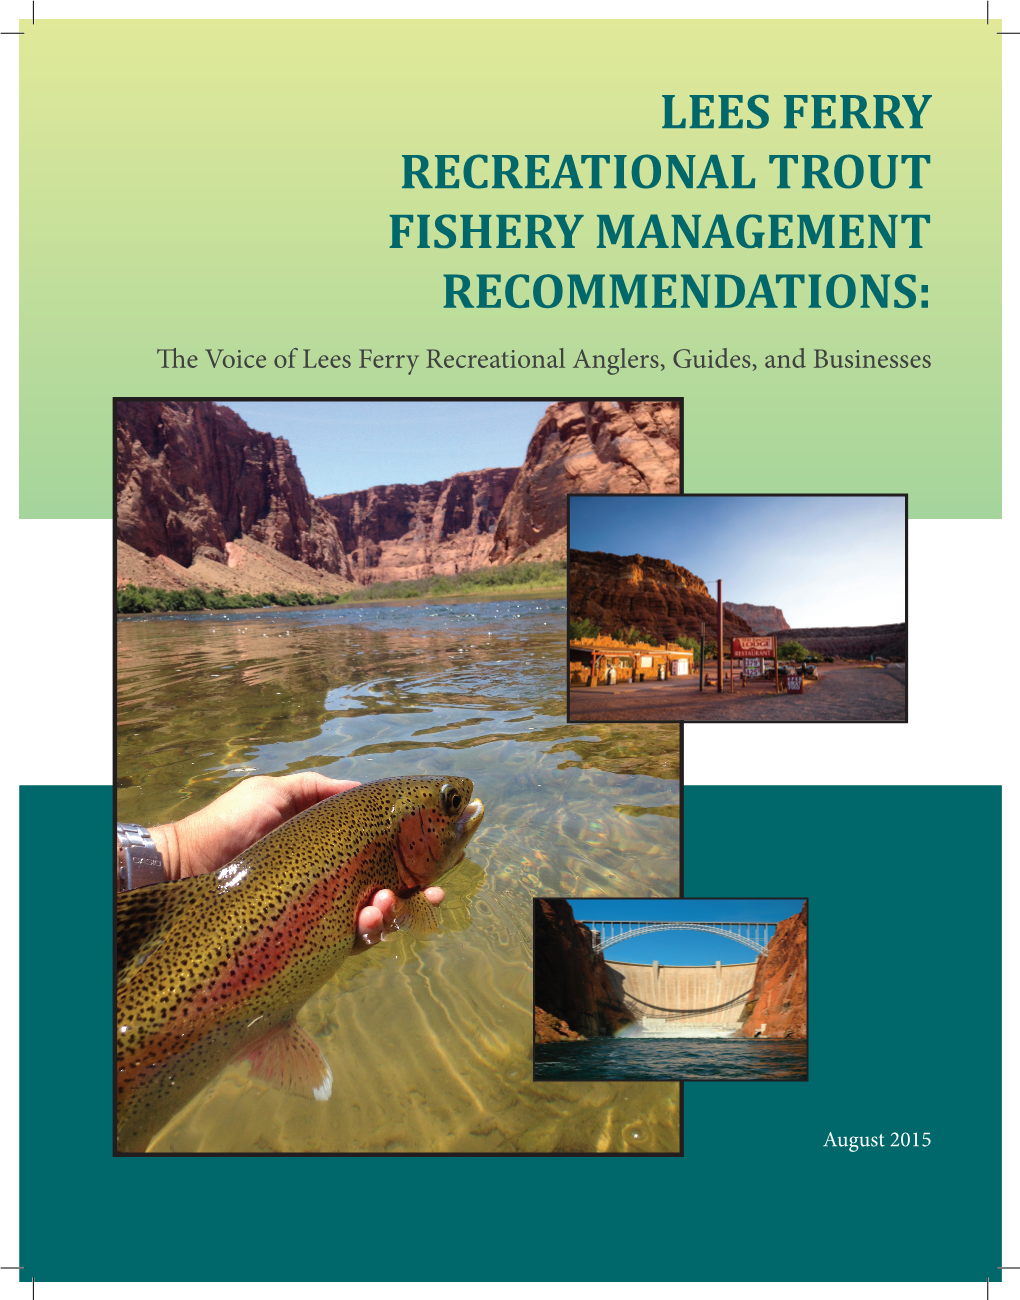 LEES FERRY RECREATIONAL TROUT FISHERY MANAGEMENT RECOMMENDATIONS: the Voice of Lees Ferry Recreational Anglers, Guides, and Businesses